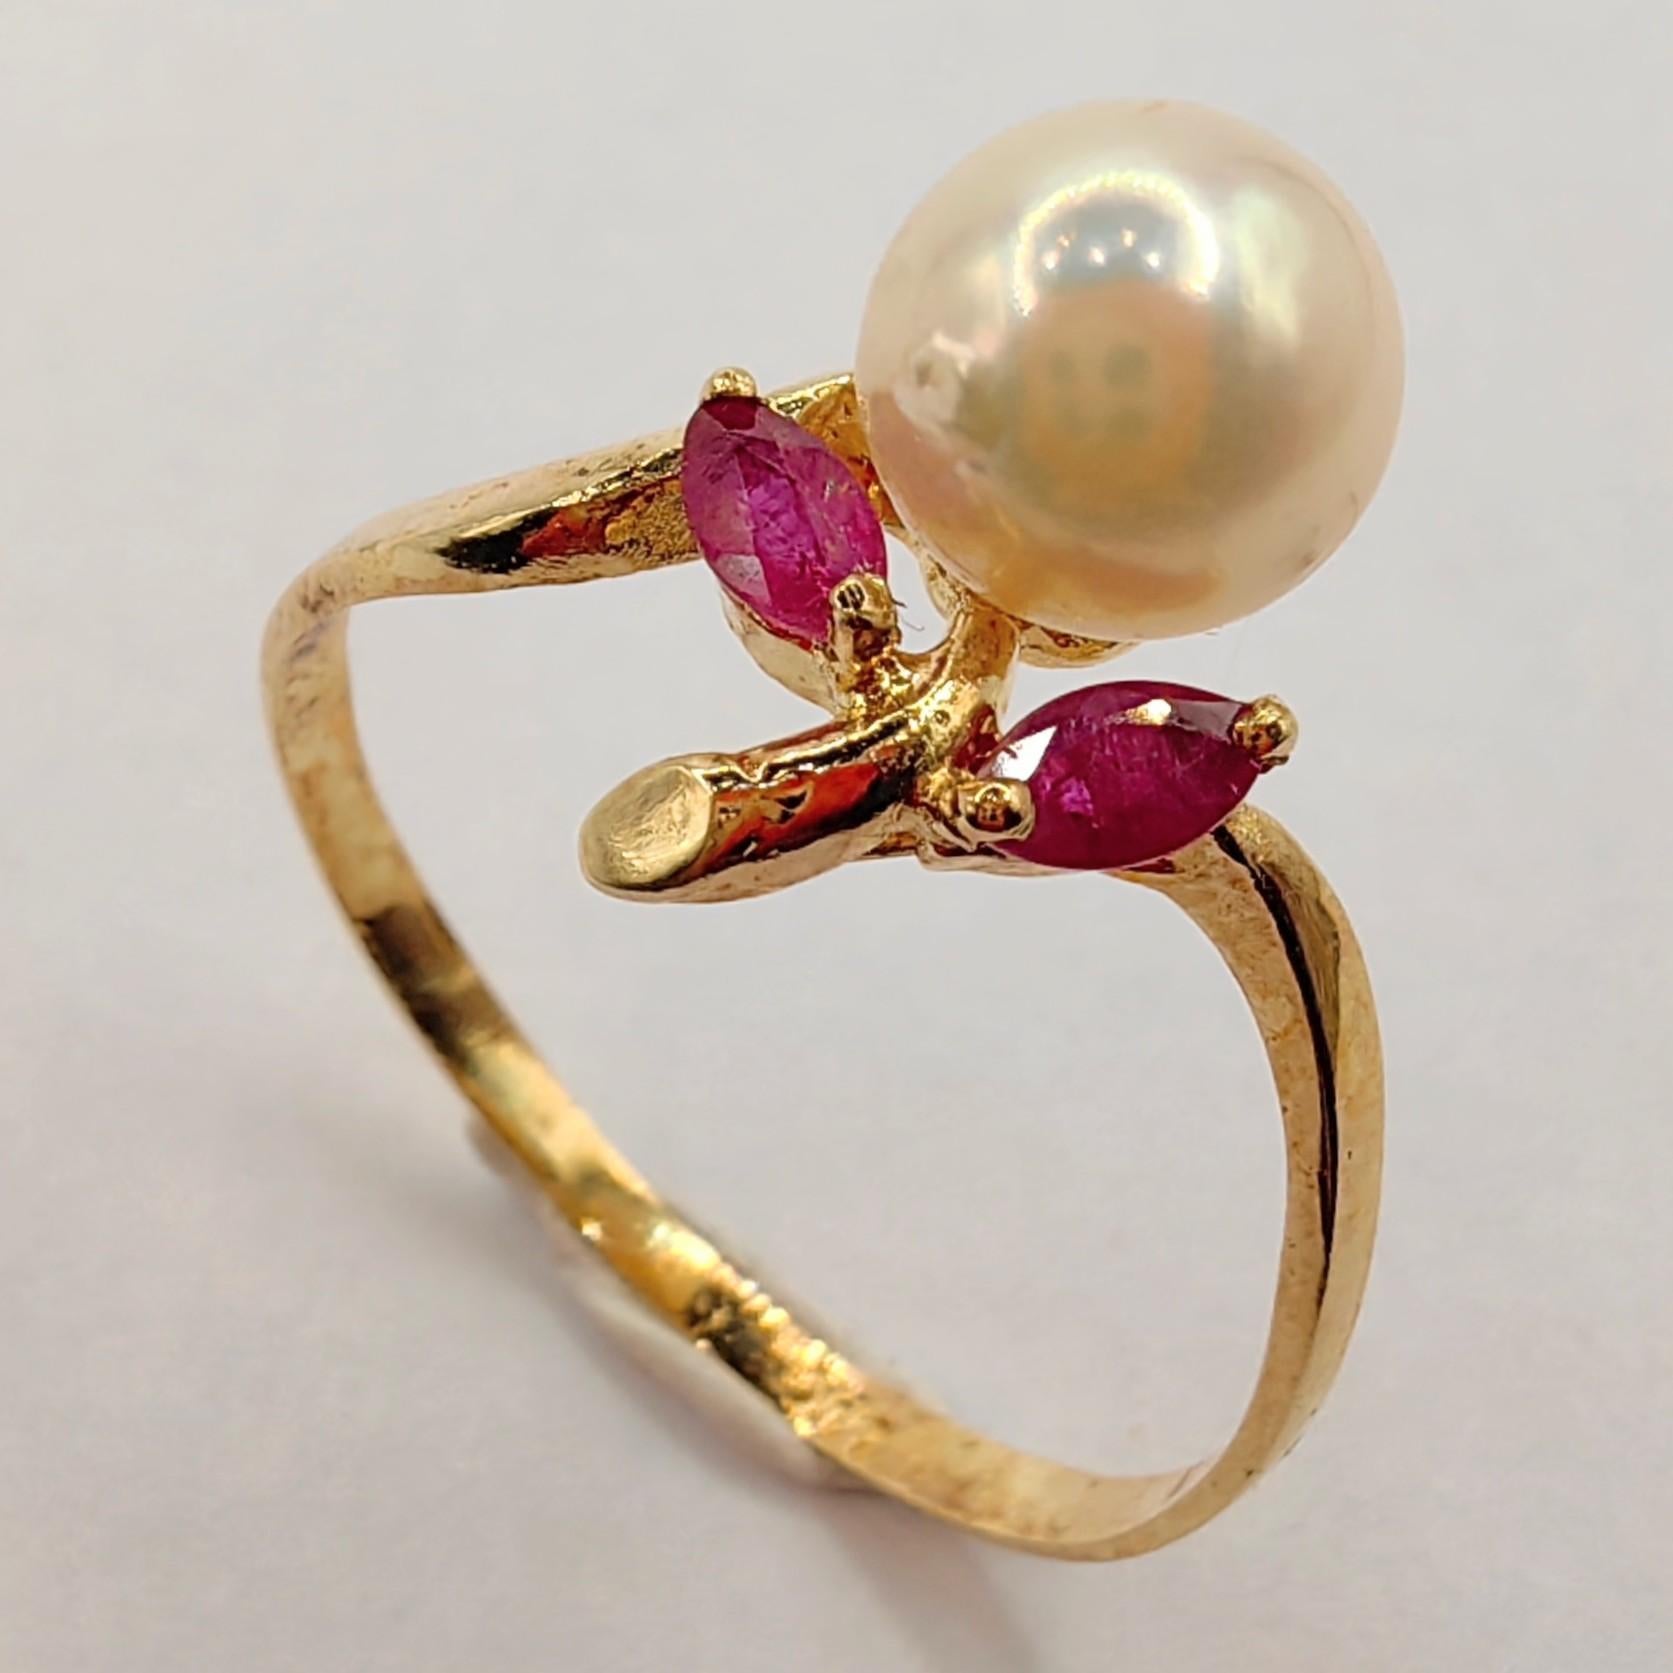 Introducing our Vintage Marquise Cut Rubies & Pearl Ring in 14K Yellow Gold, a timeless piece that combines classic charm with graceful elegance.

At the heart of this exquisite ring lies a lustrous Freshwater Cultured Round Pearl, measuring 6.38mm.